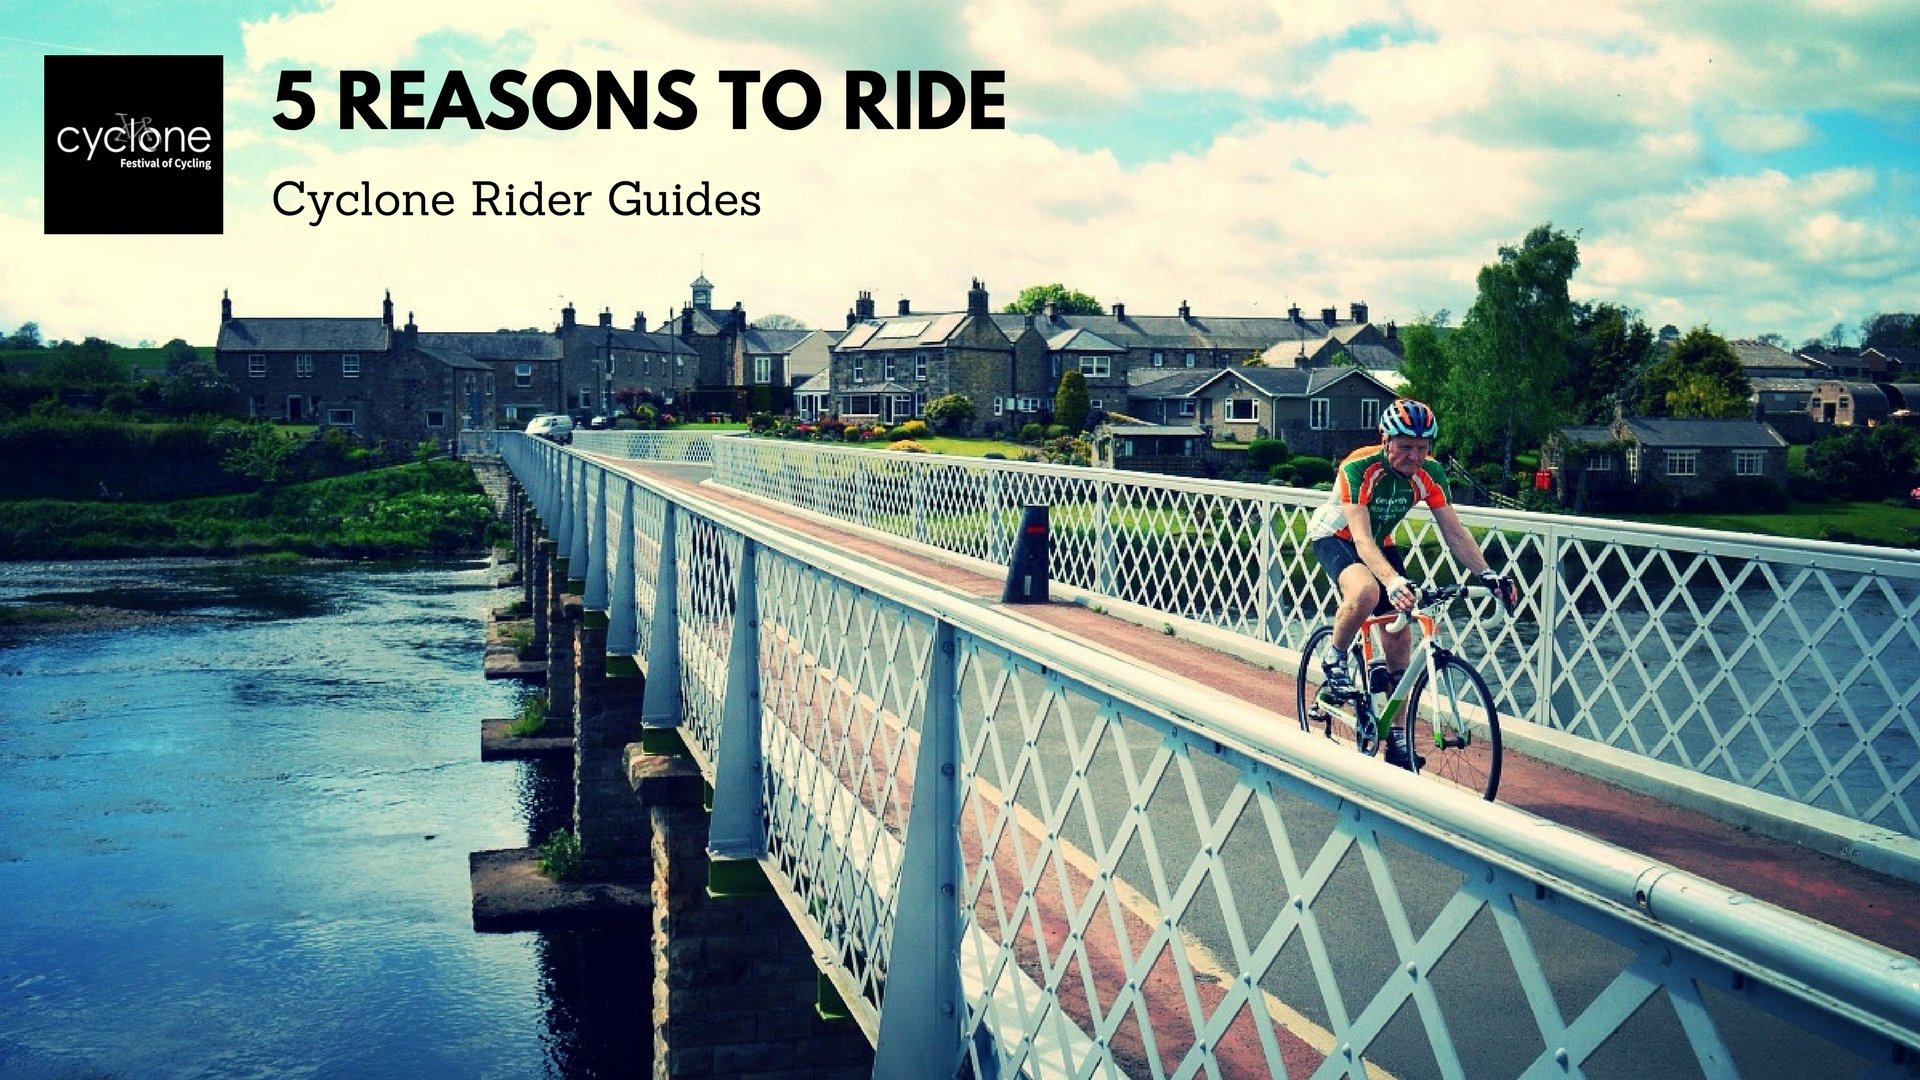 5 Reasons to Ride - Challenge Rides